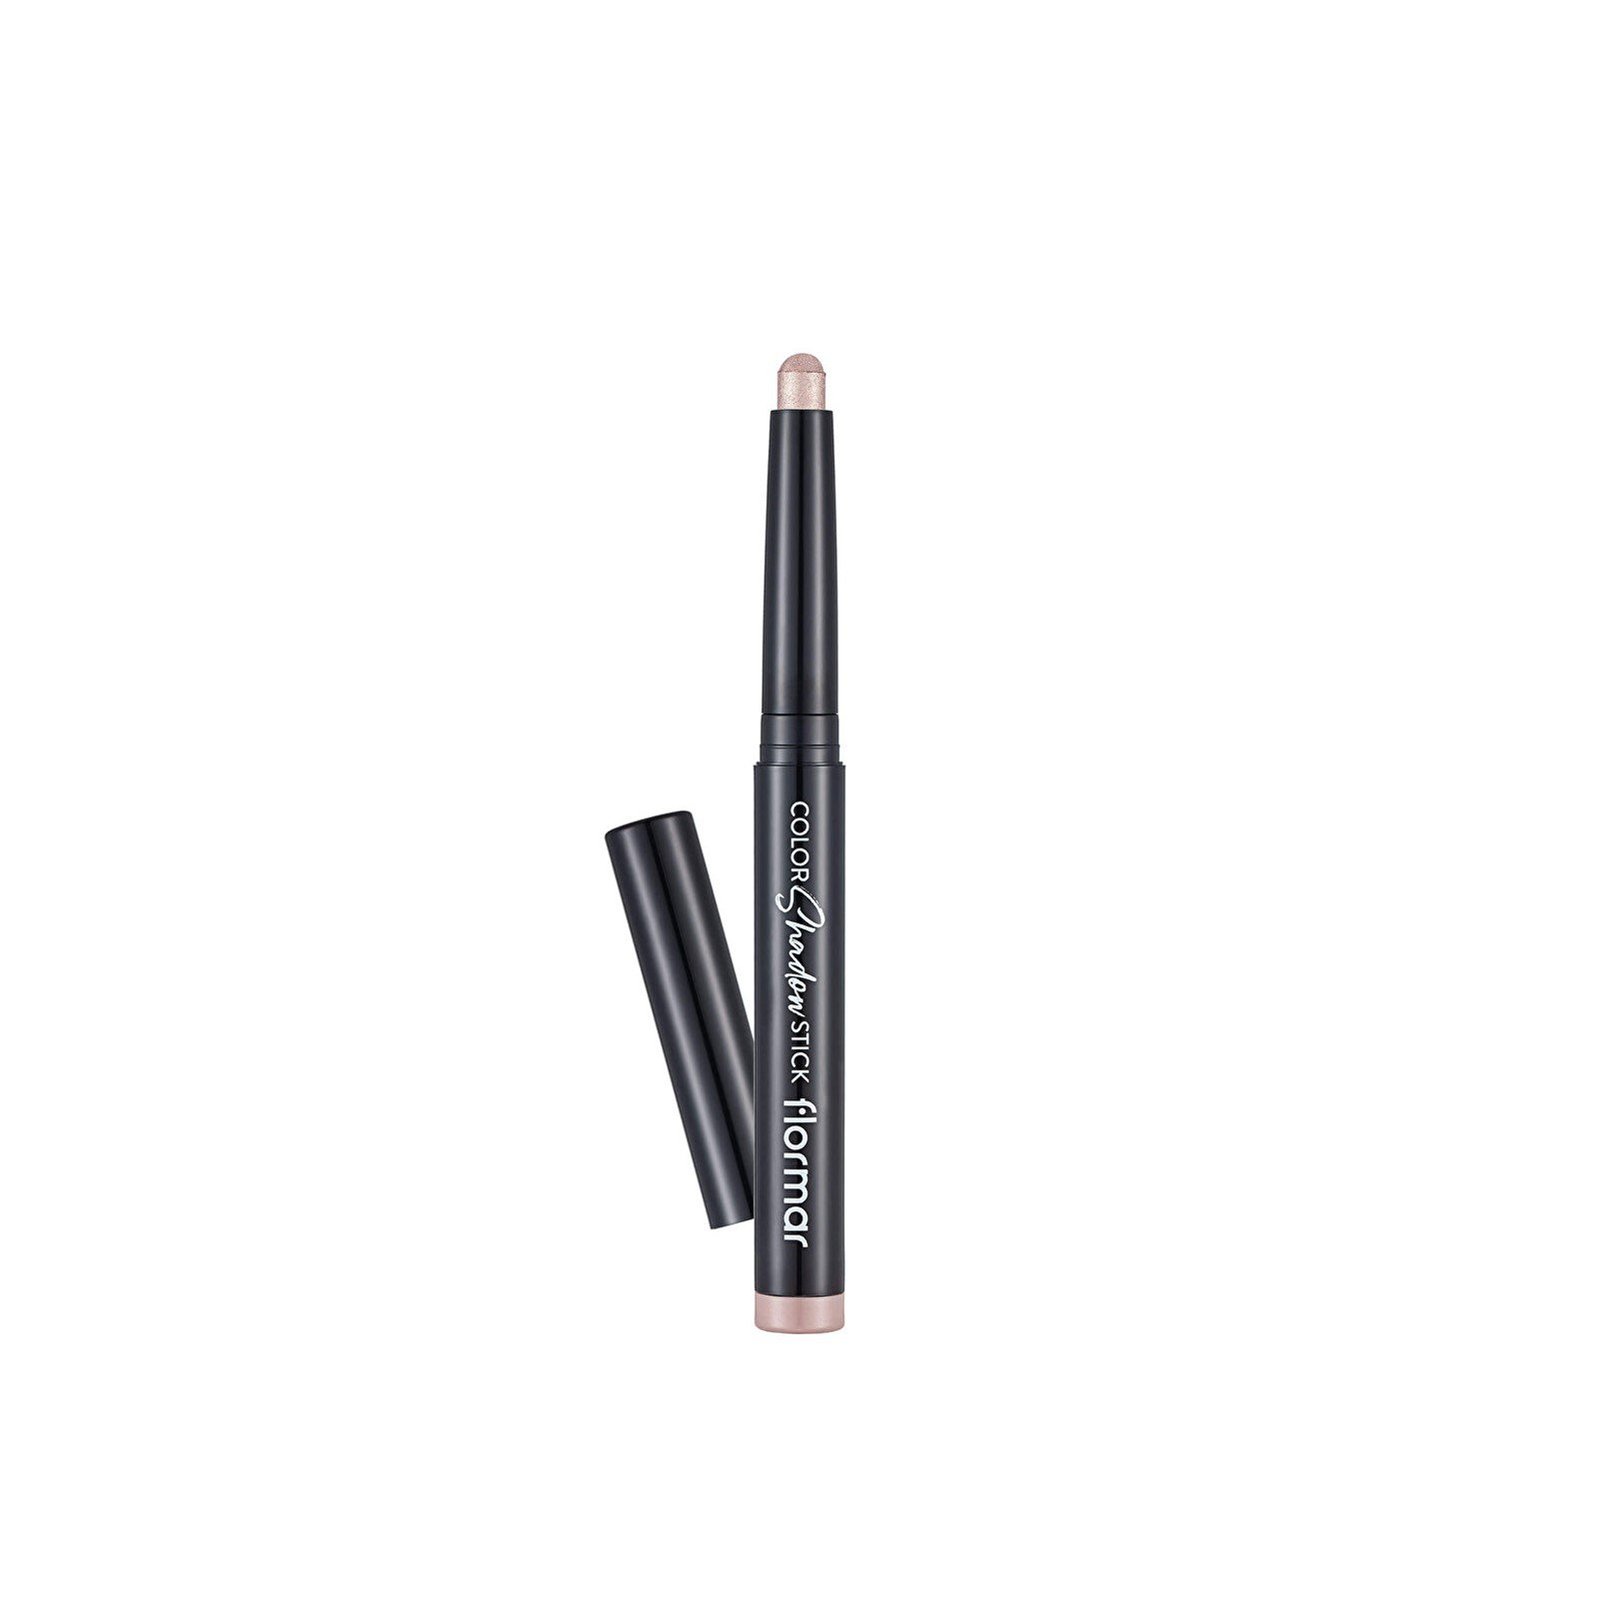 Flormar Color Shadow Stick 003 Perfect Lights 1.6g